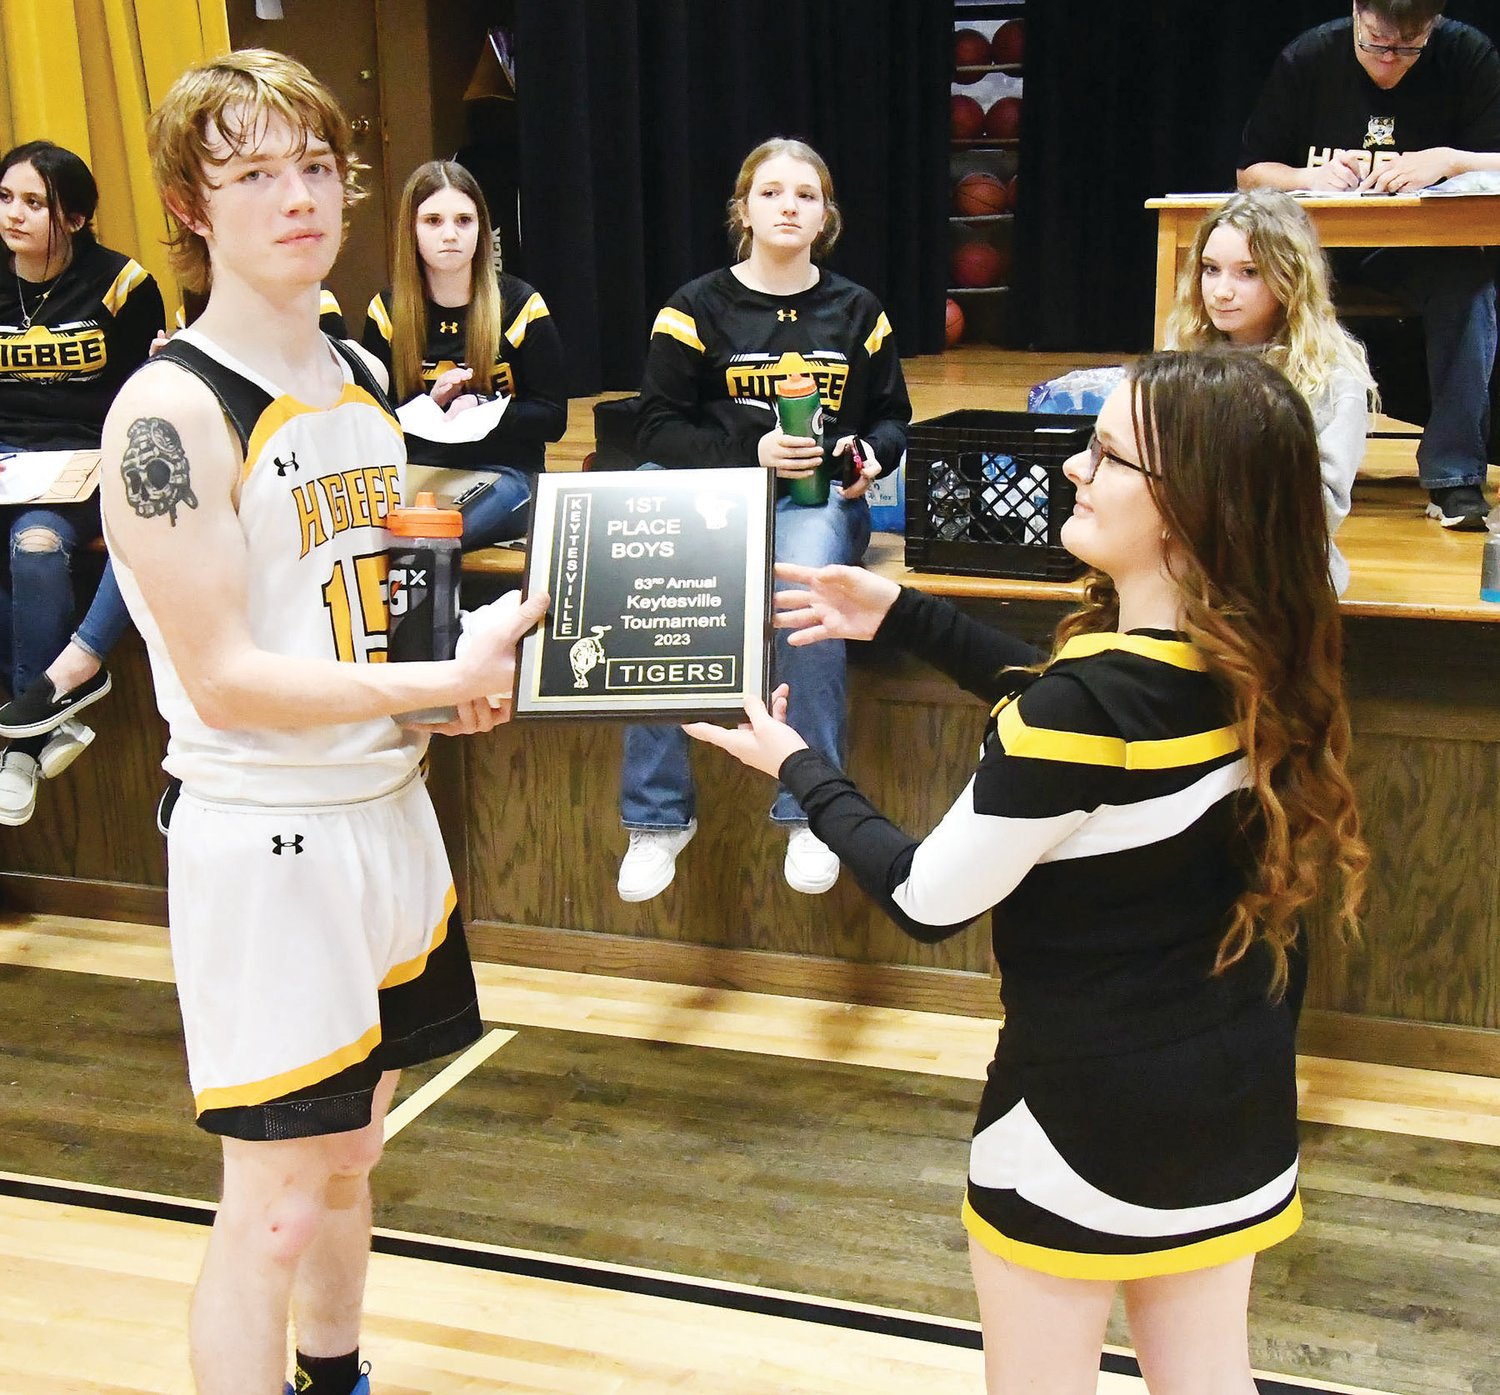 Higbee's Chad Crawford accepts the first-place plaque from a Keytesville cheerleader.